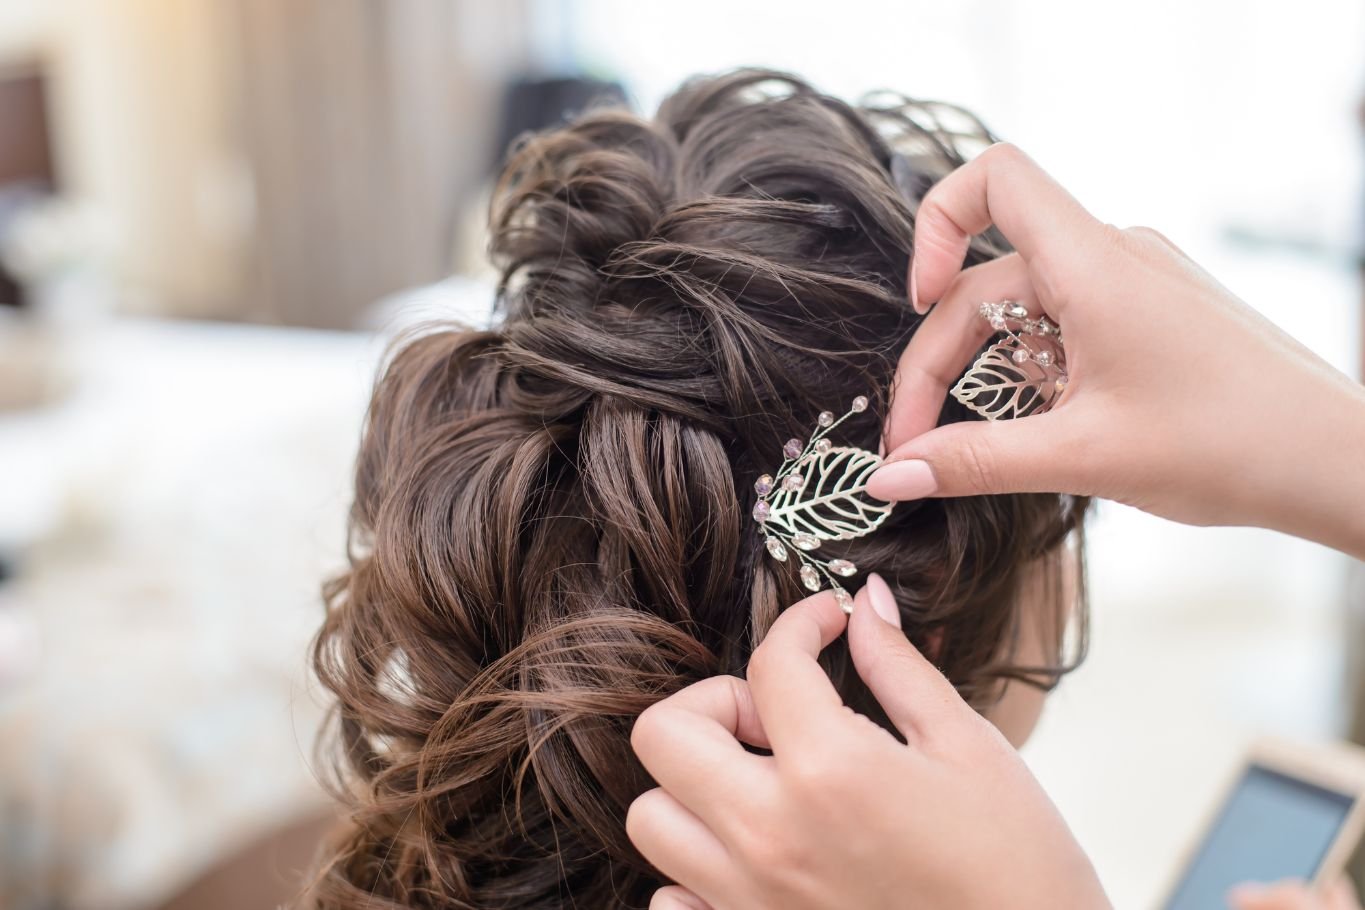 Our favourite simple wedding hairstyles ideas for long hair - Booksy.com